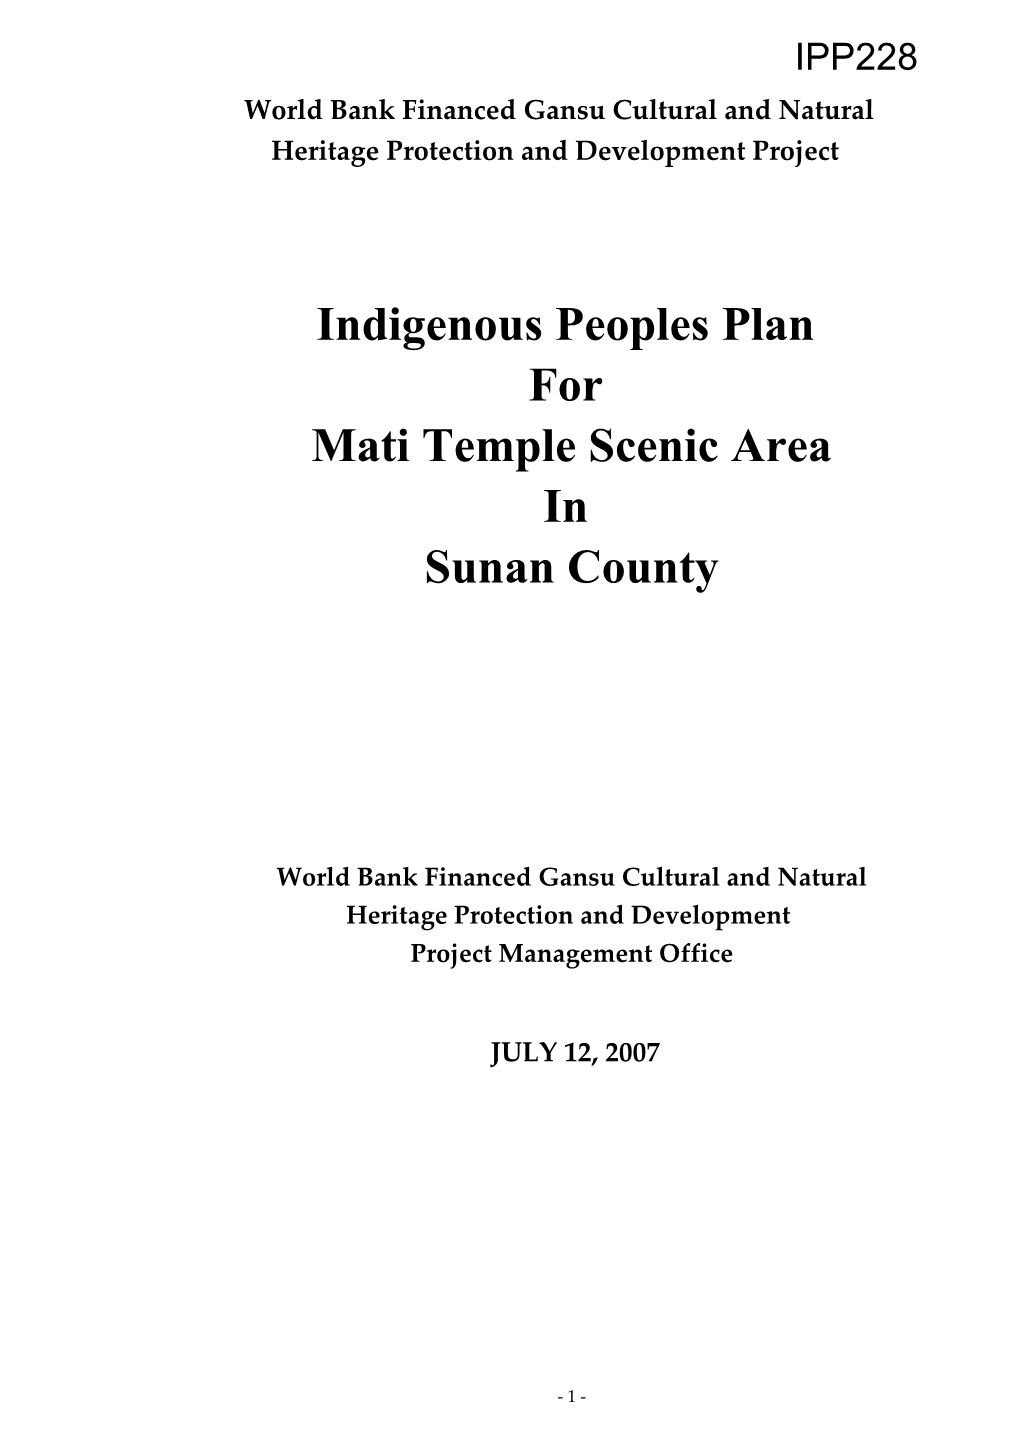 World Bank Financedgansu Cultural and Natural Heritage Protection and Development